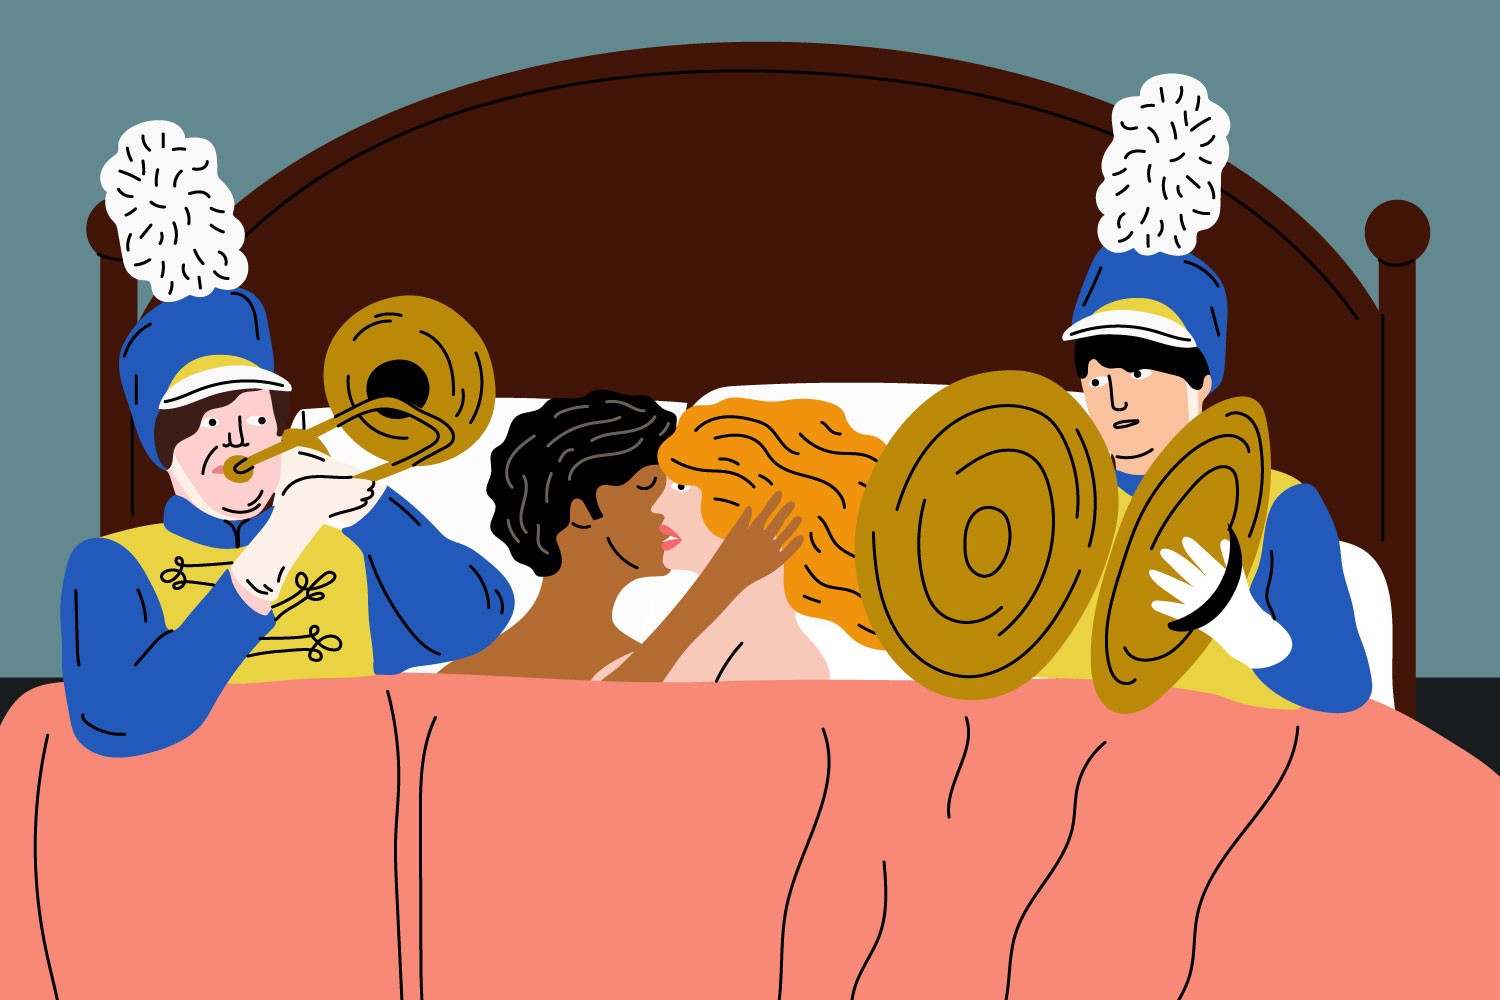 Illustration shows a couple in bed with a marching band